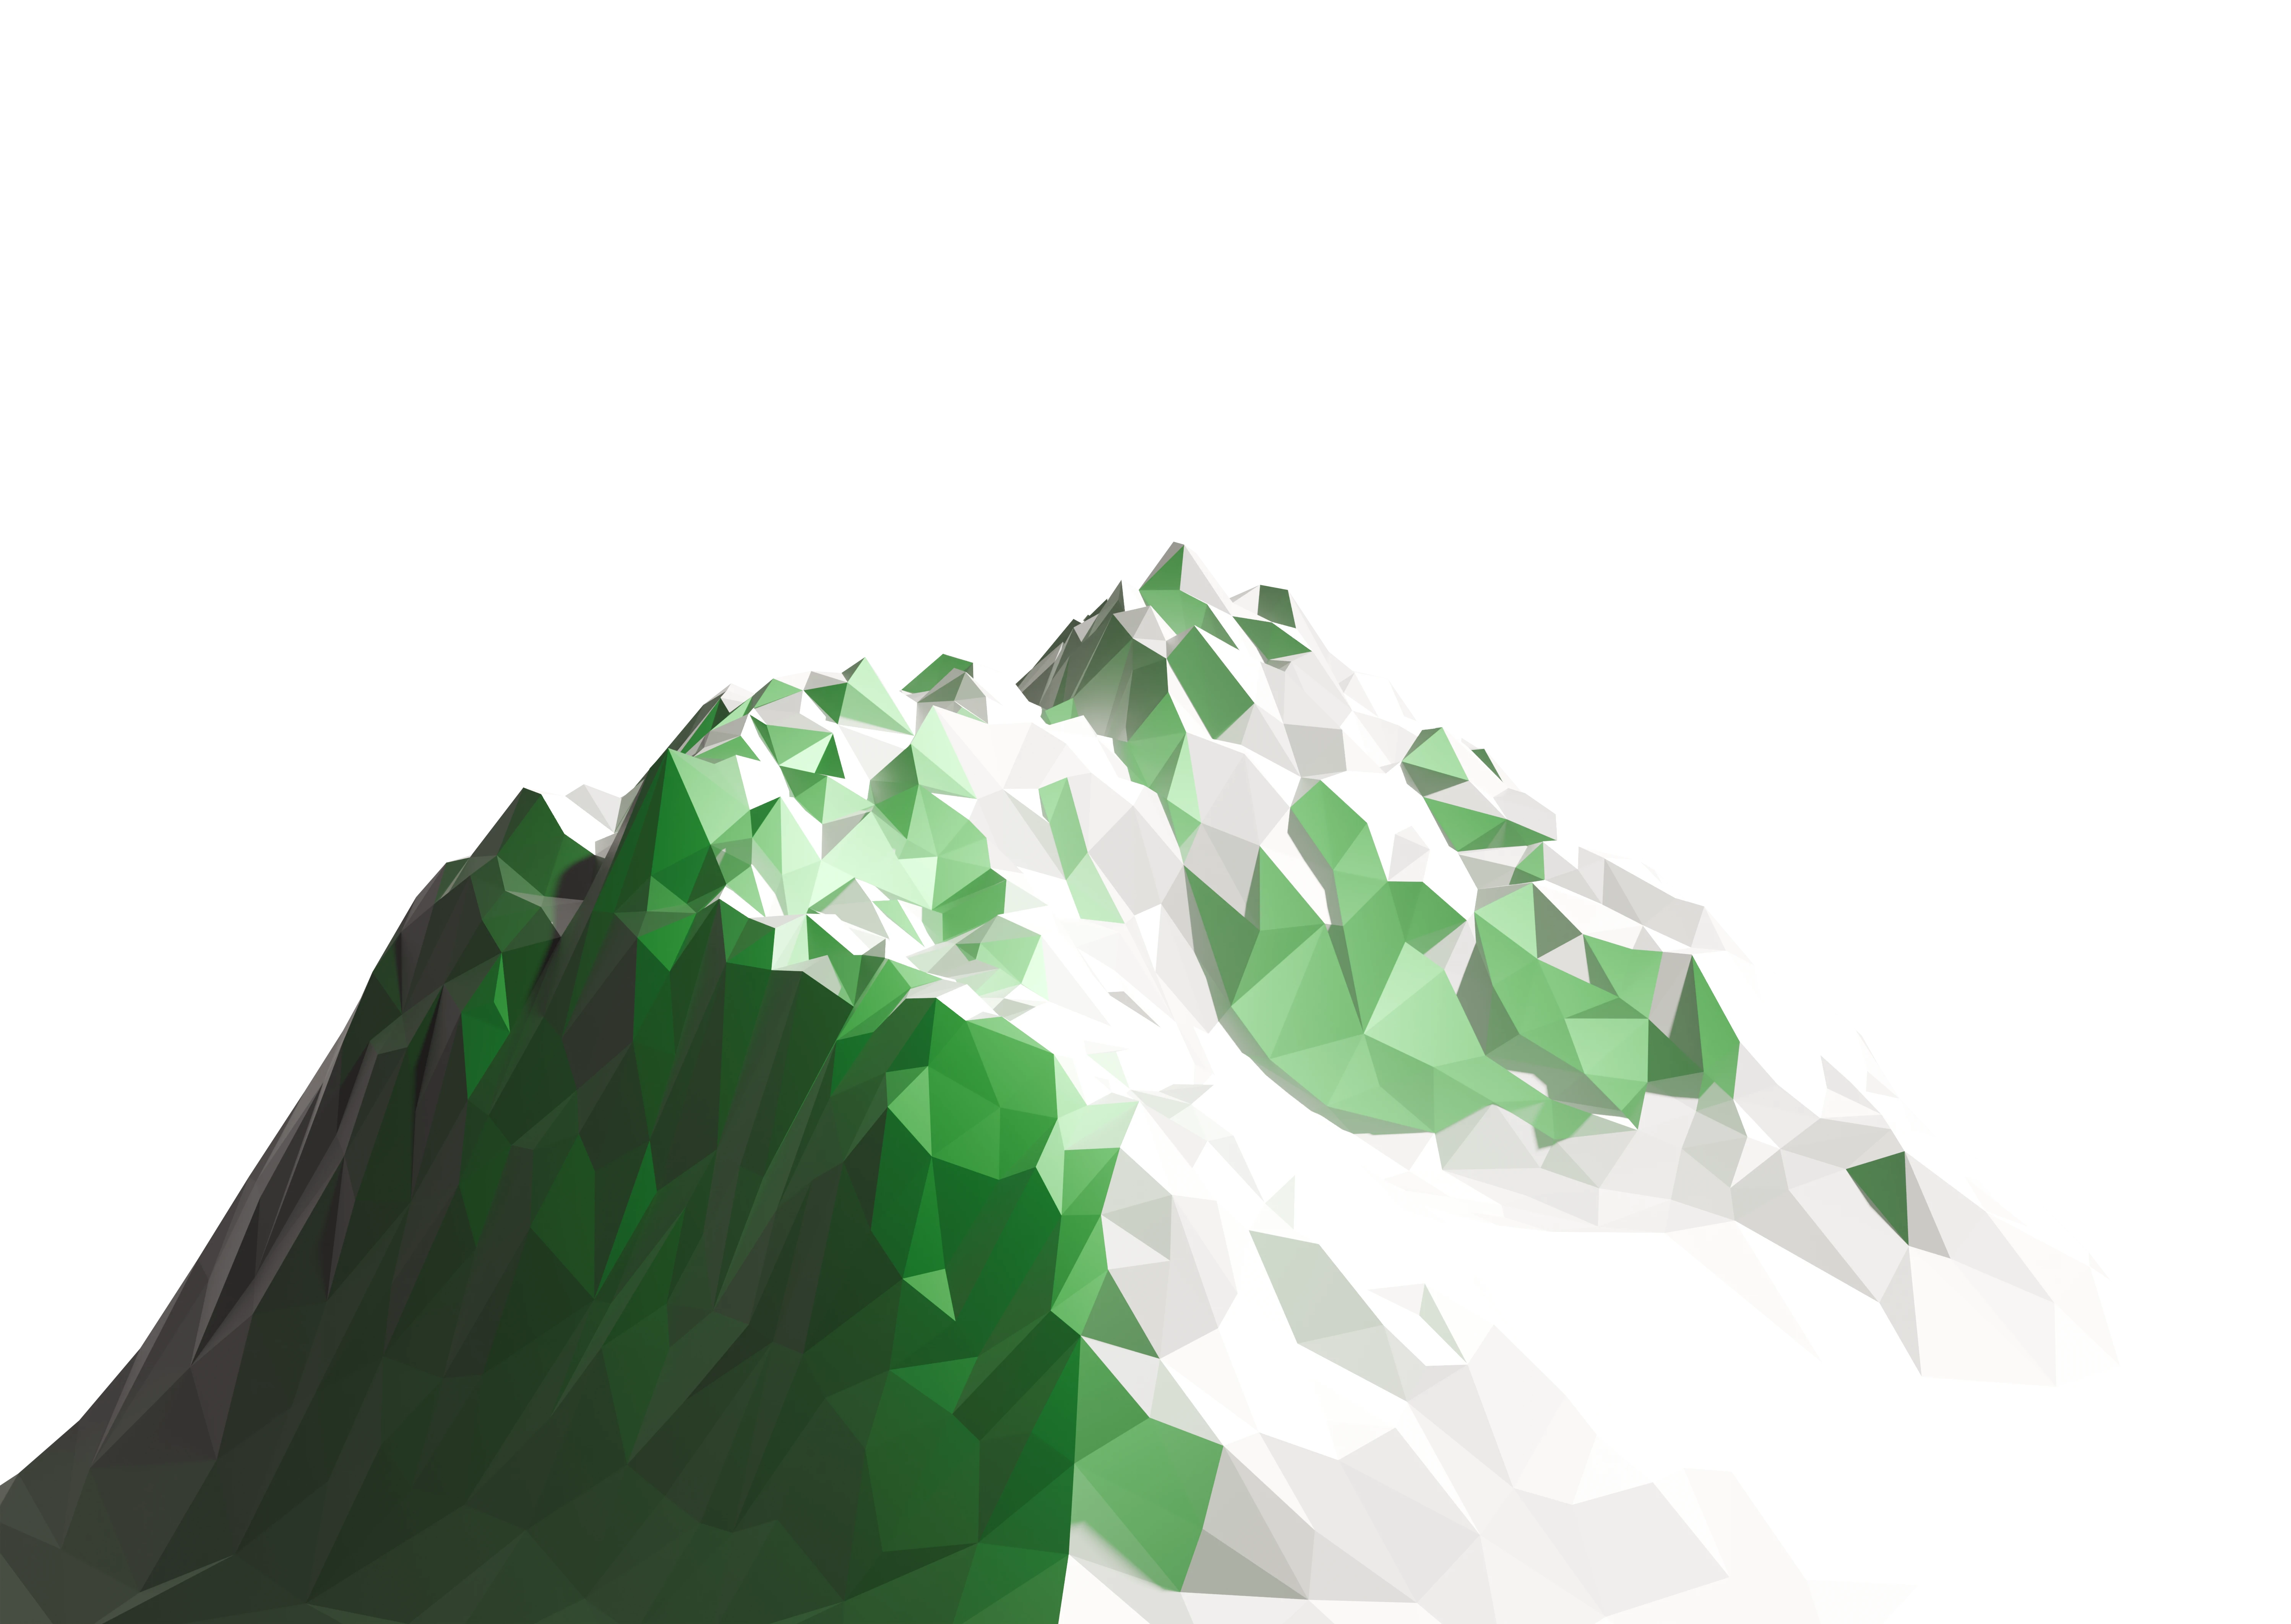 A transparent image of a low-poly 3D mountain made by me, Terrell Turner. One side is illuminated by sunlight, the other side is lit by a peaceful green glow.